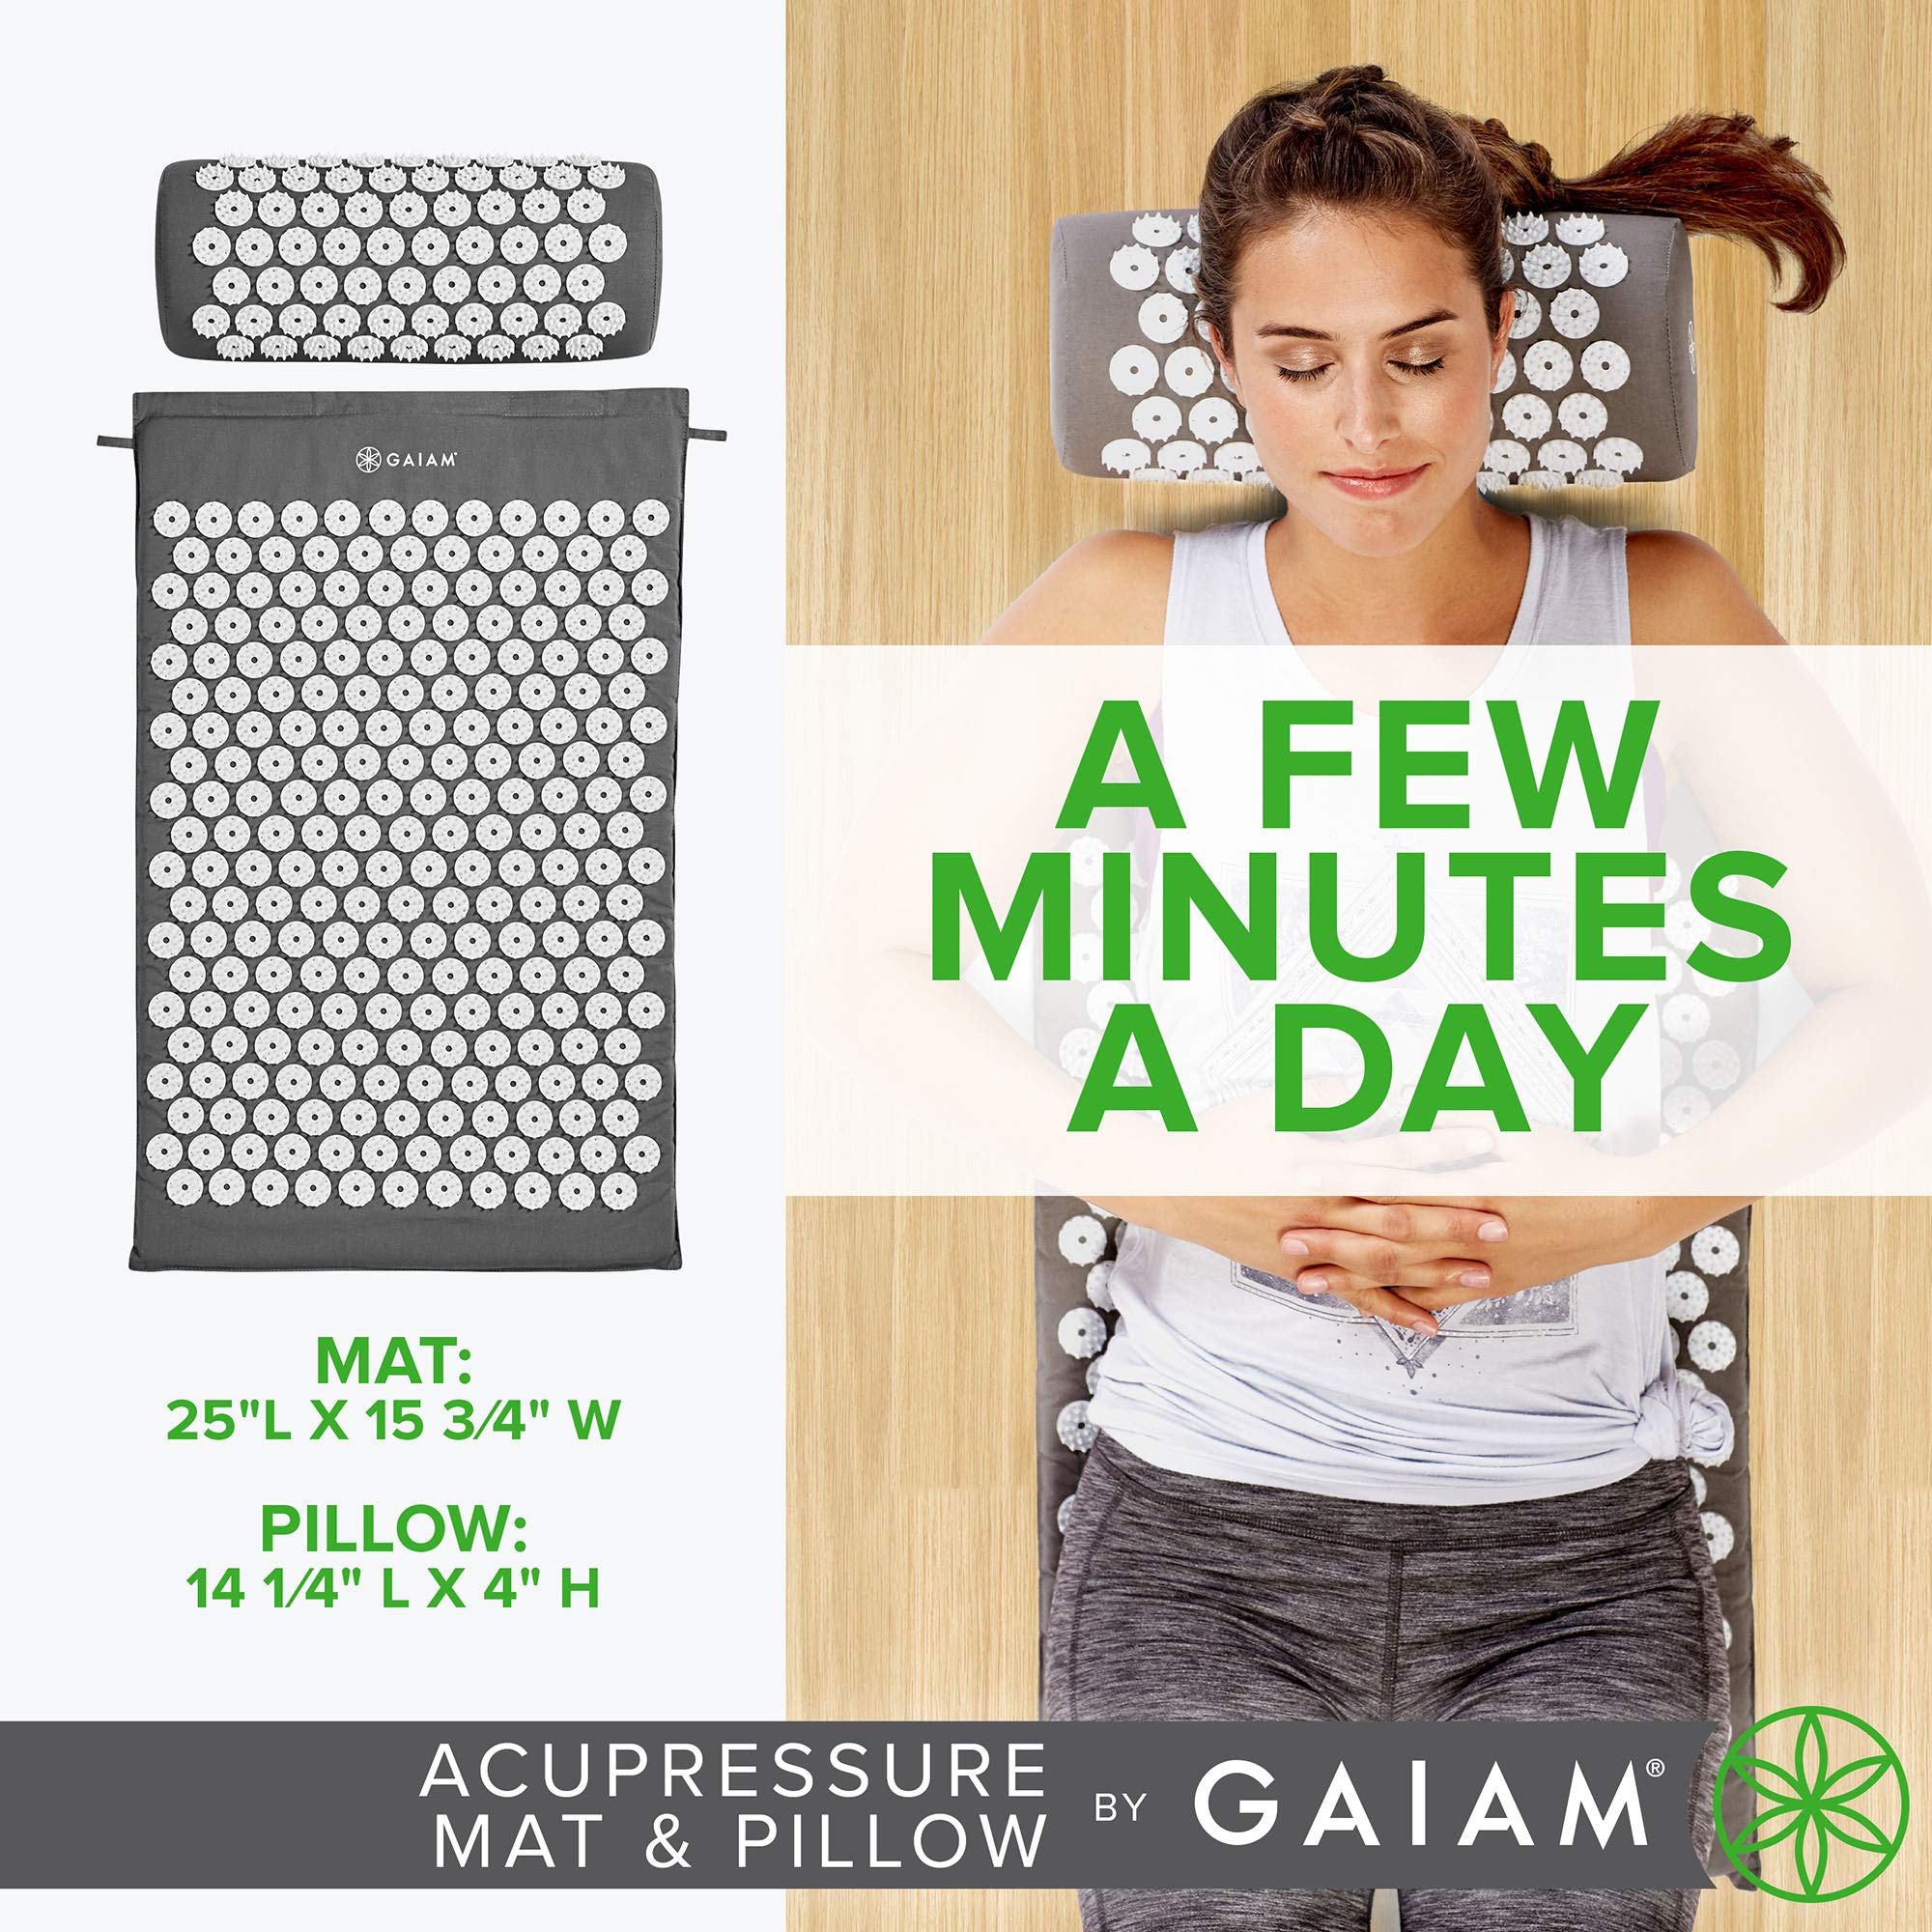 Gaiam Acupressure Mat and Pillow Set, Acupuncture Style Massage Mat & Pillow, Relief for Sciatic Nerve, Muscle Tension, Fibromyalgia, Neck, Shoulder & Back Pain, Migraine & Headaches and Insomnia Grey